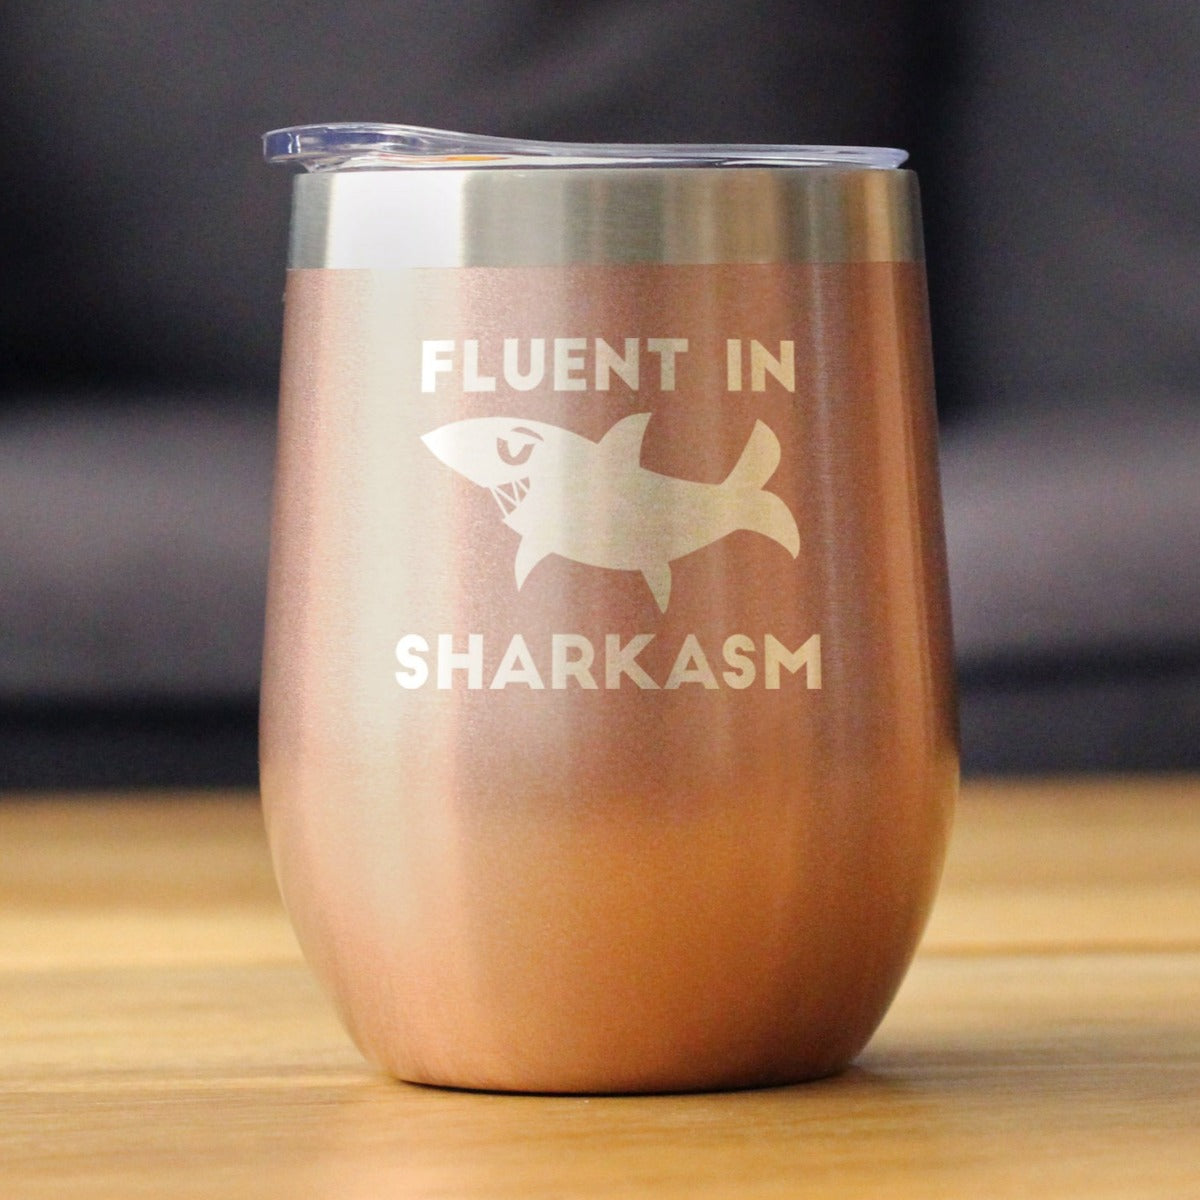 Fluent in Sharkasm - Funny Shark Wine Tumbler Glass with Sliding Lid - Stainless Steel Insulated Mug - Cute Shark Decor Gifts